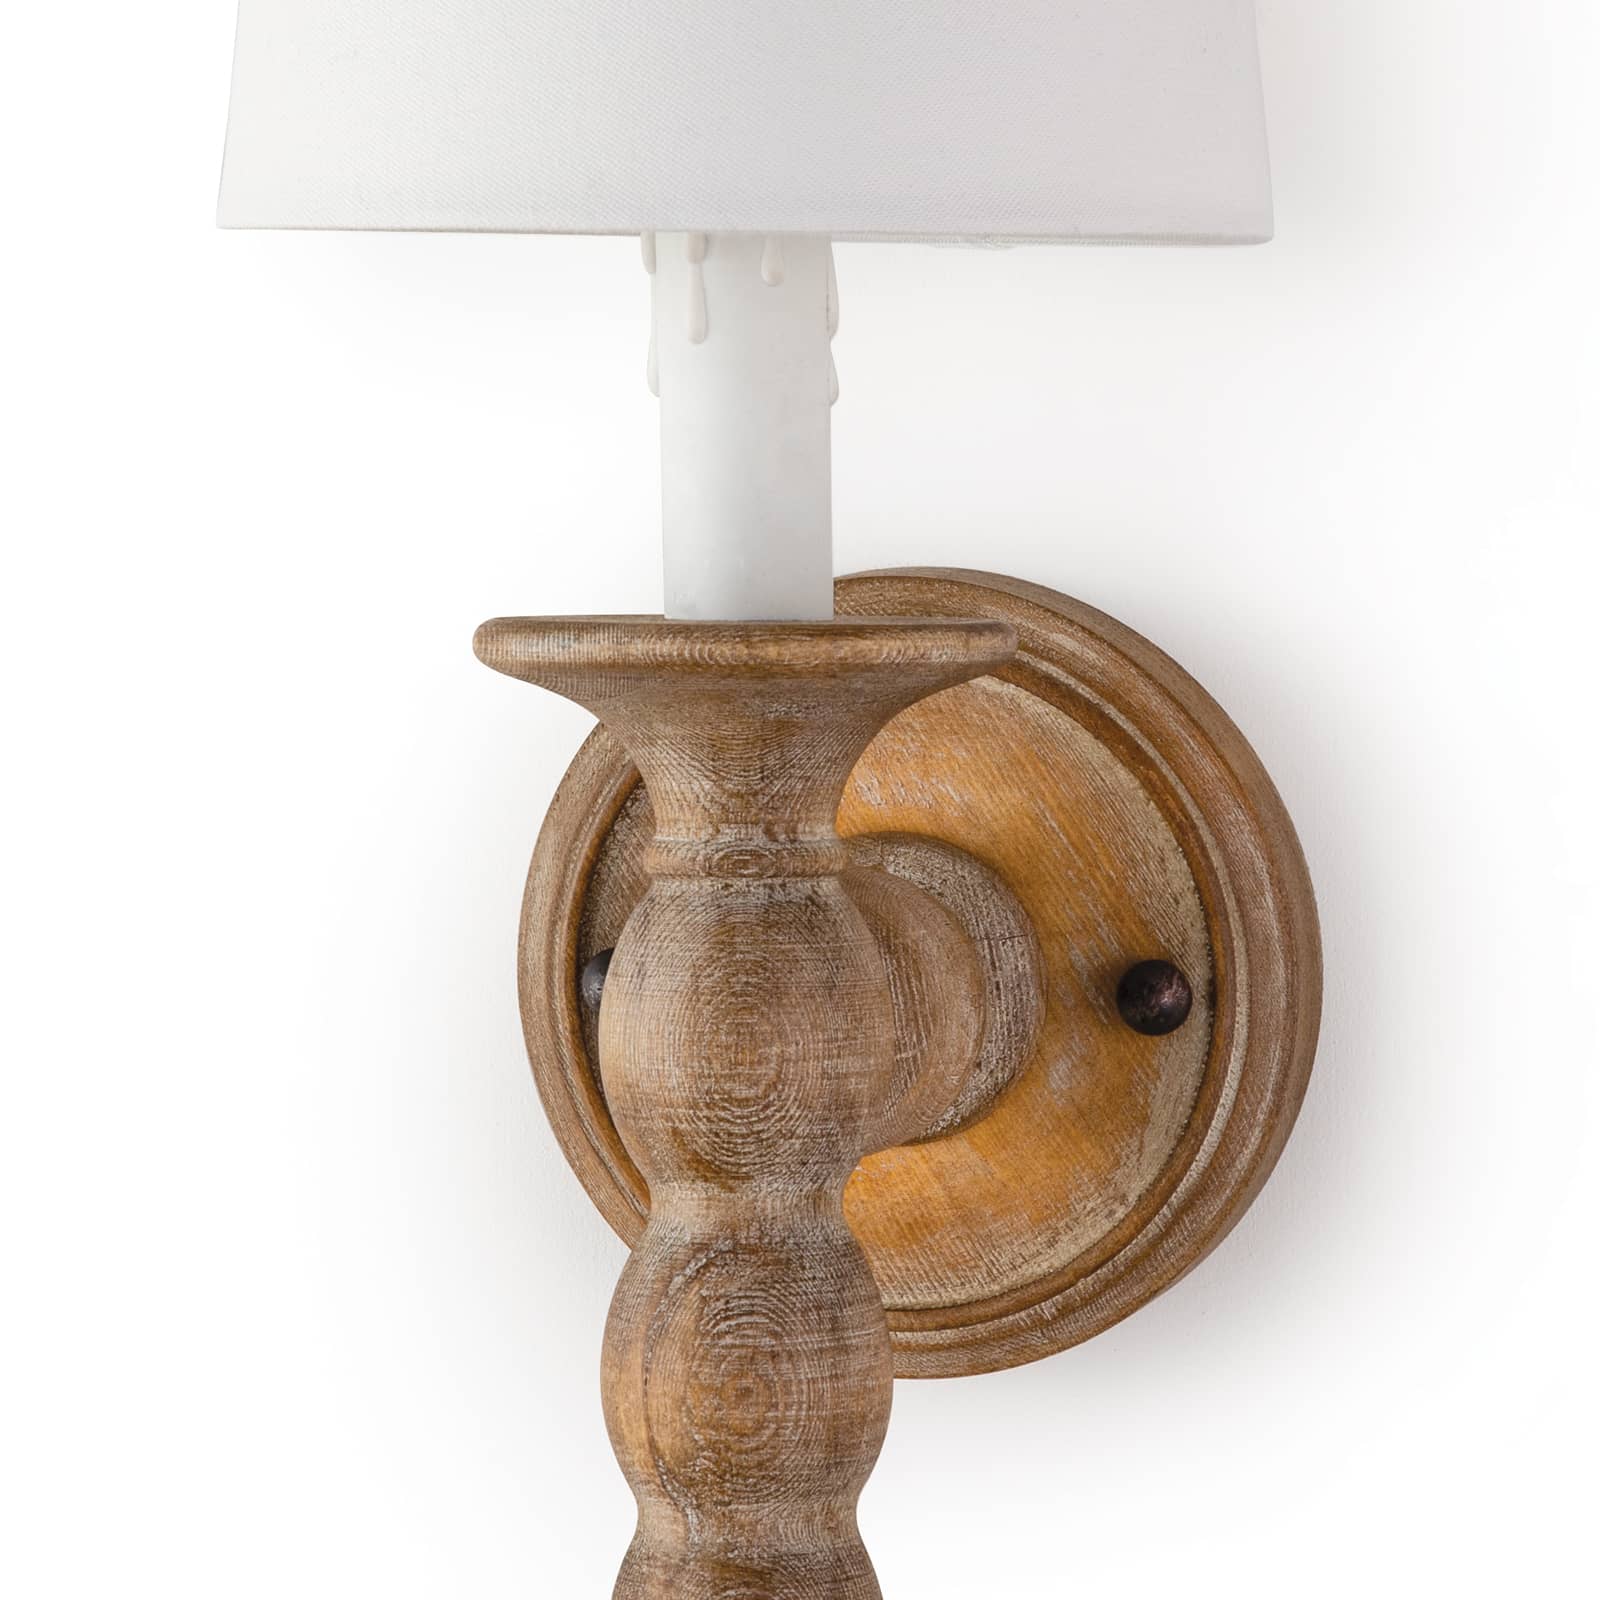 Coastal Living Perennial Sconce in Natural